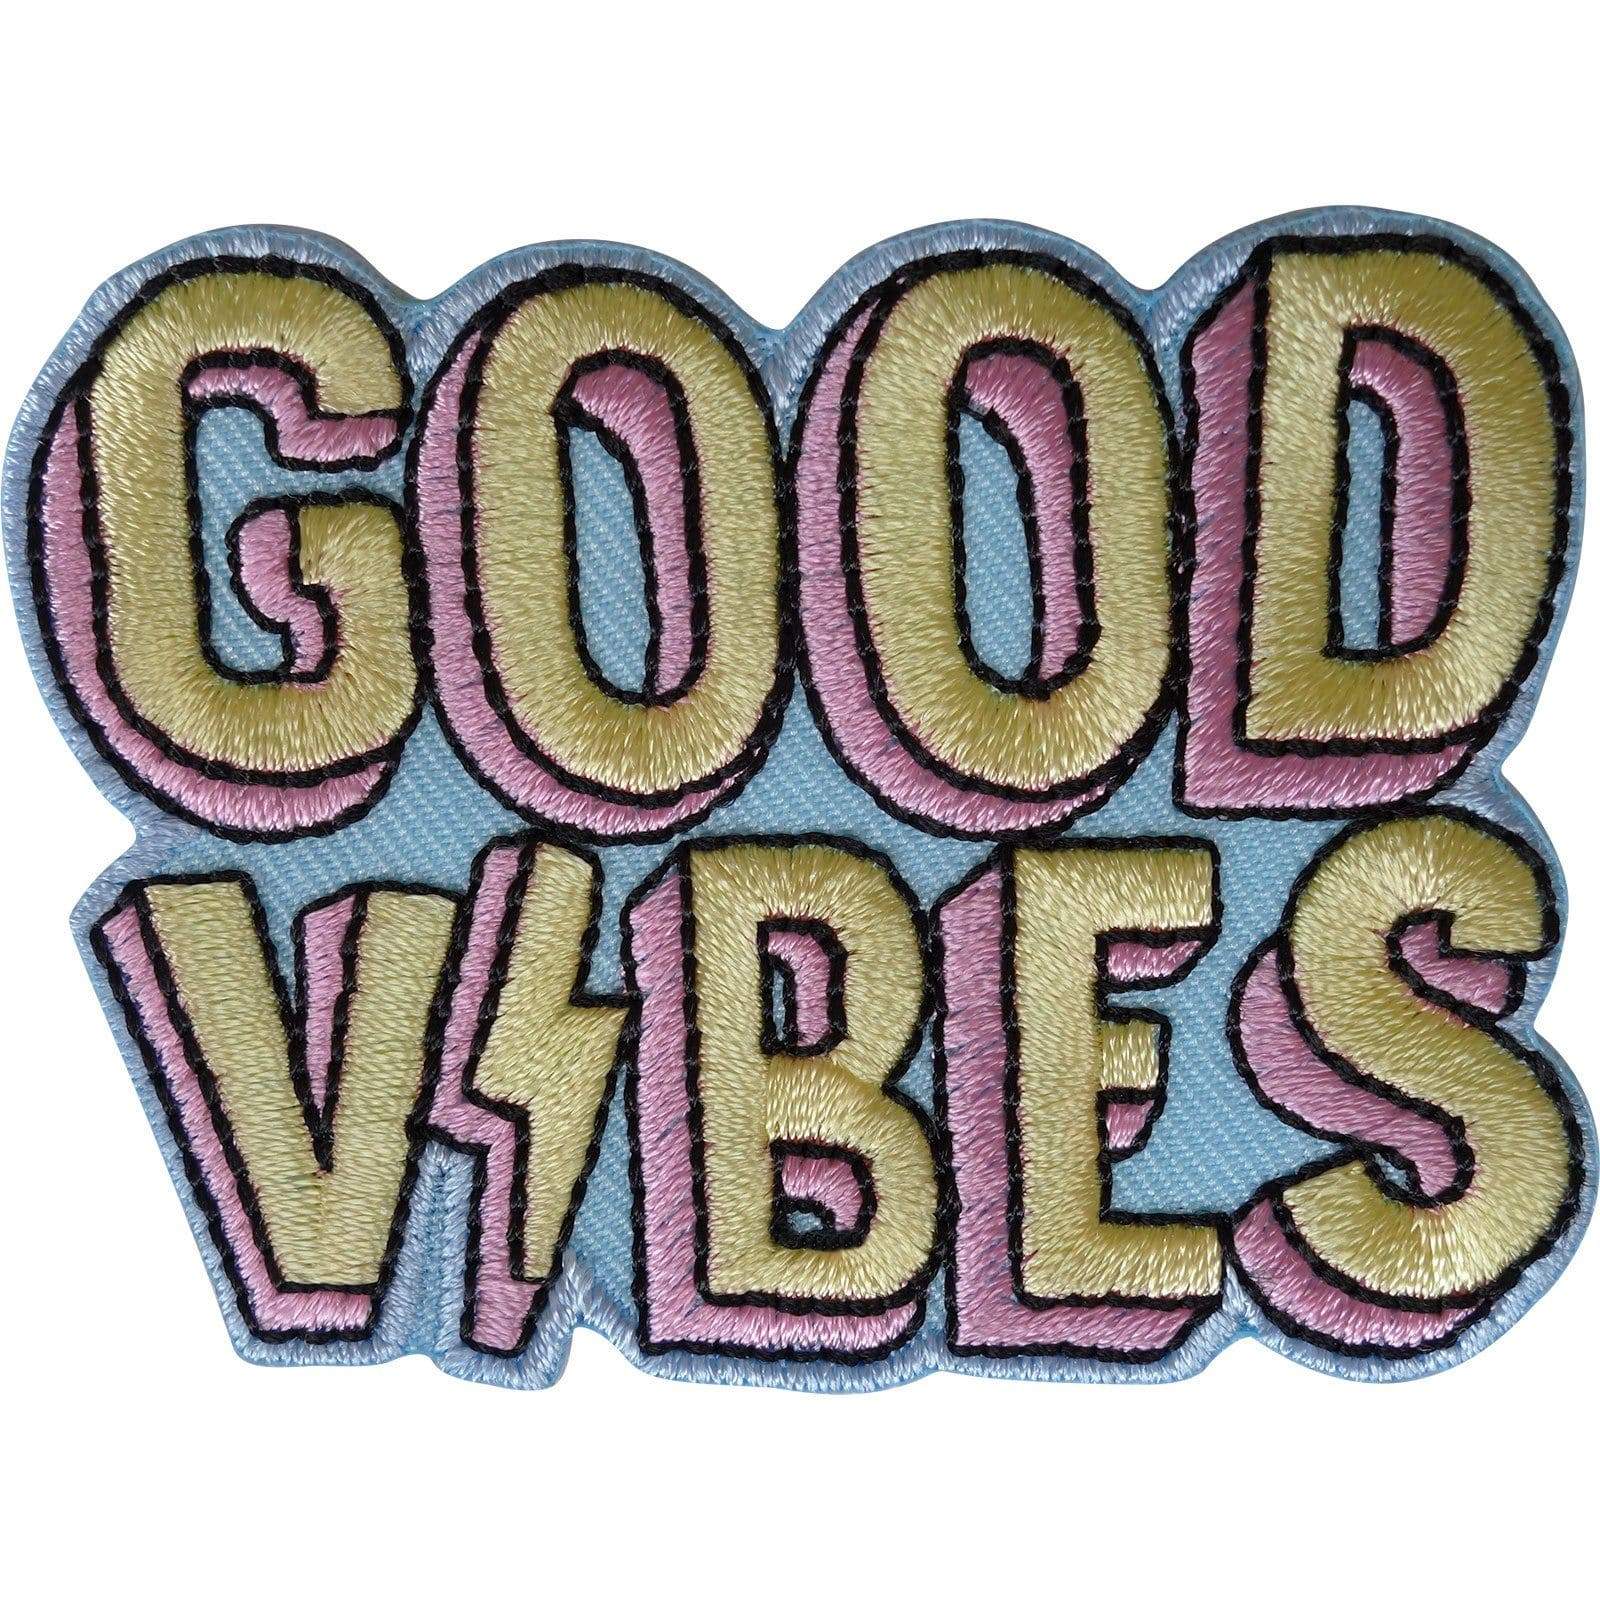 Good Vibes Patch Iron Sew On Clothes Bag Embroidered Badge Embroidery Applique